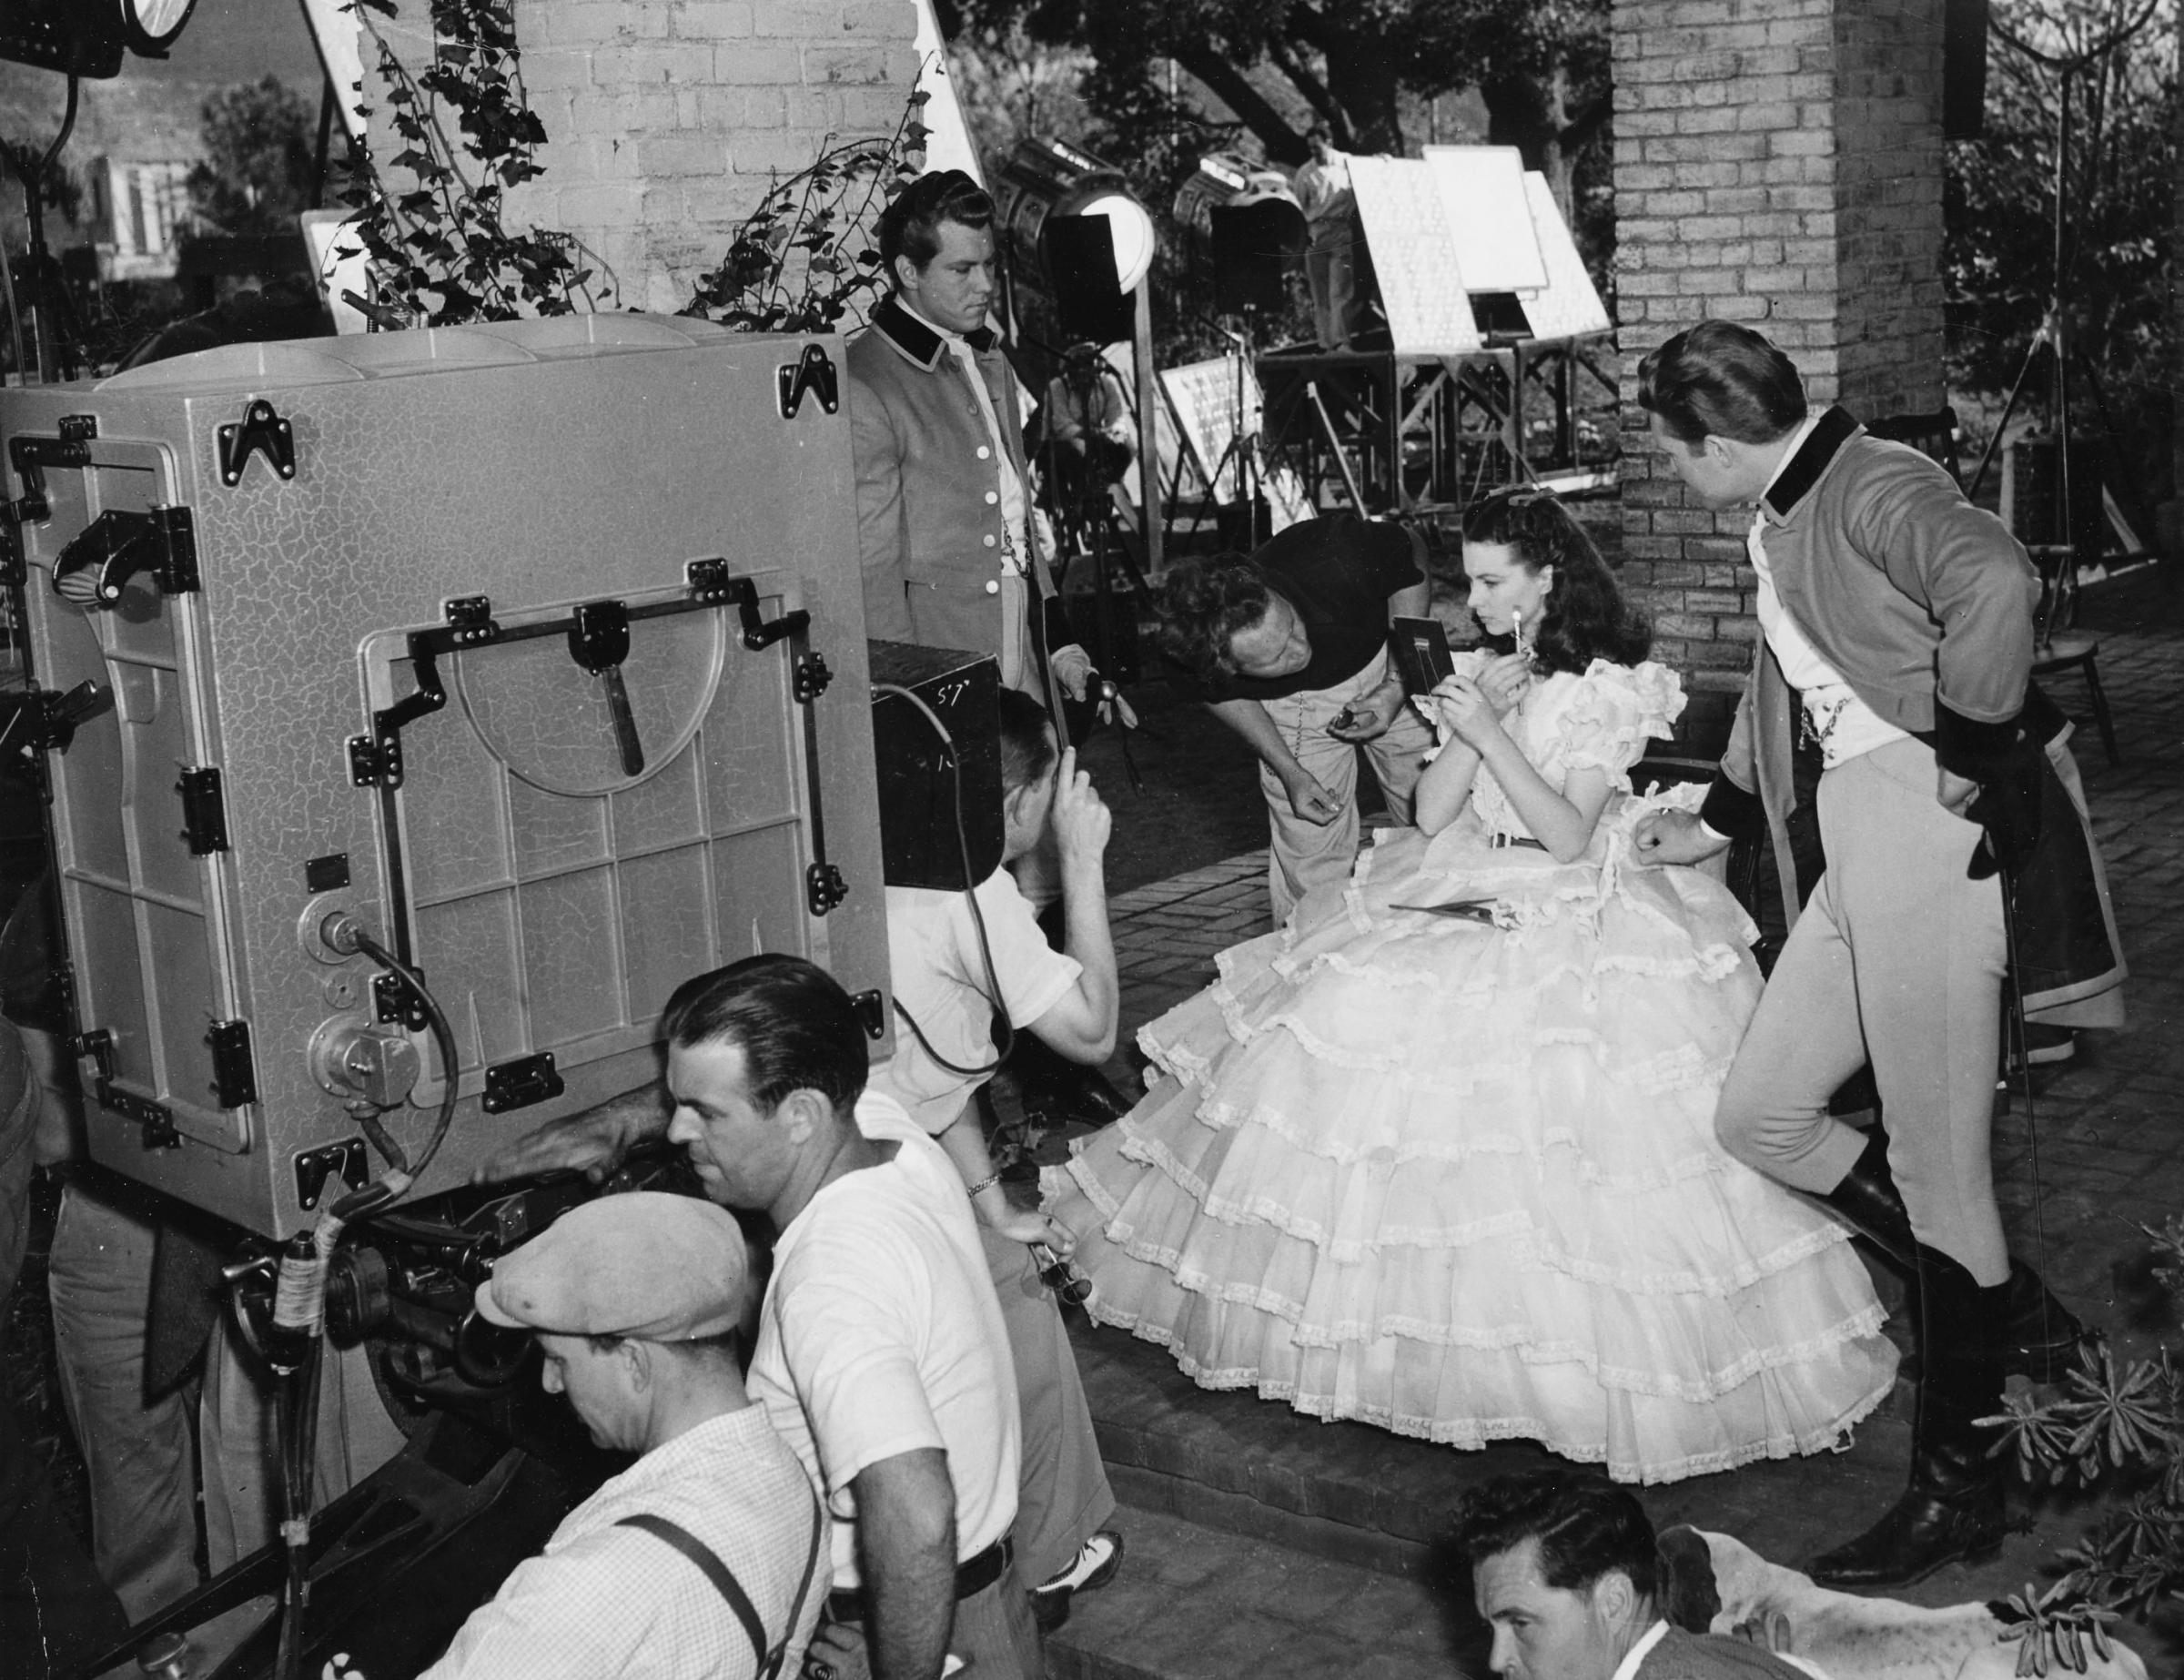 Vivien Leigh on the set of Gone with the Wind in 1939.